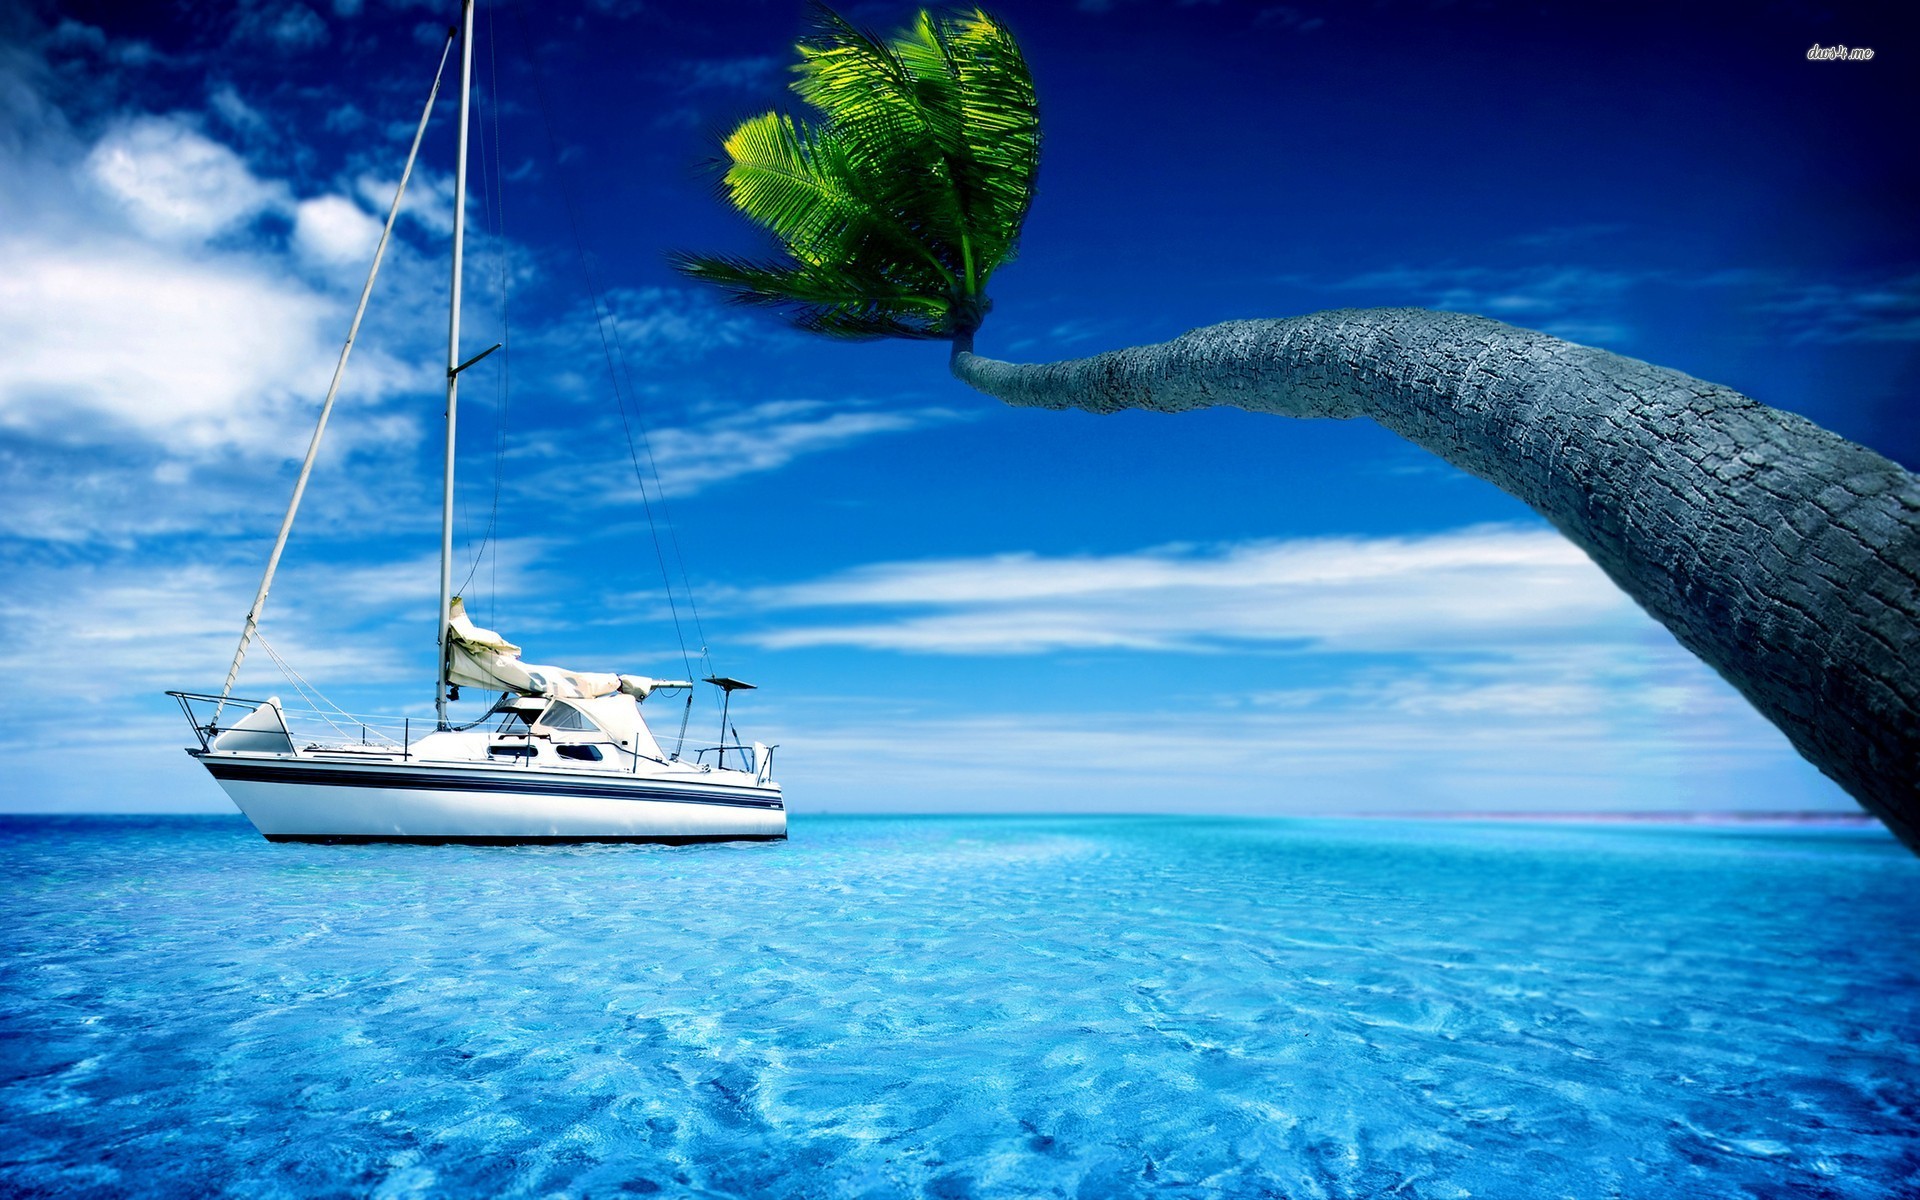 palm tree and boat | Desktop Backgrounds for Free HD Wallpaper ...